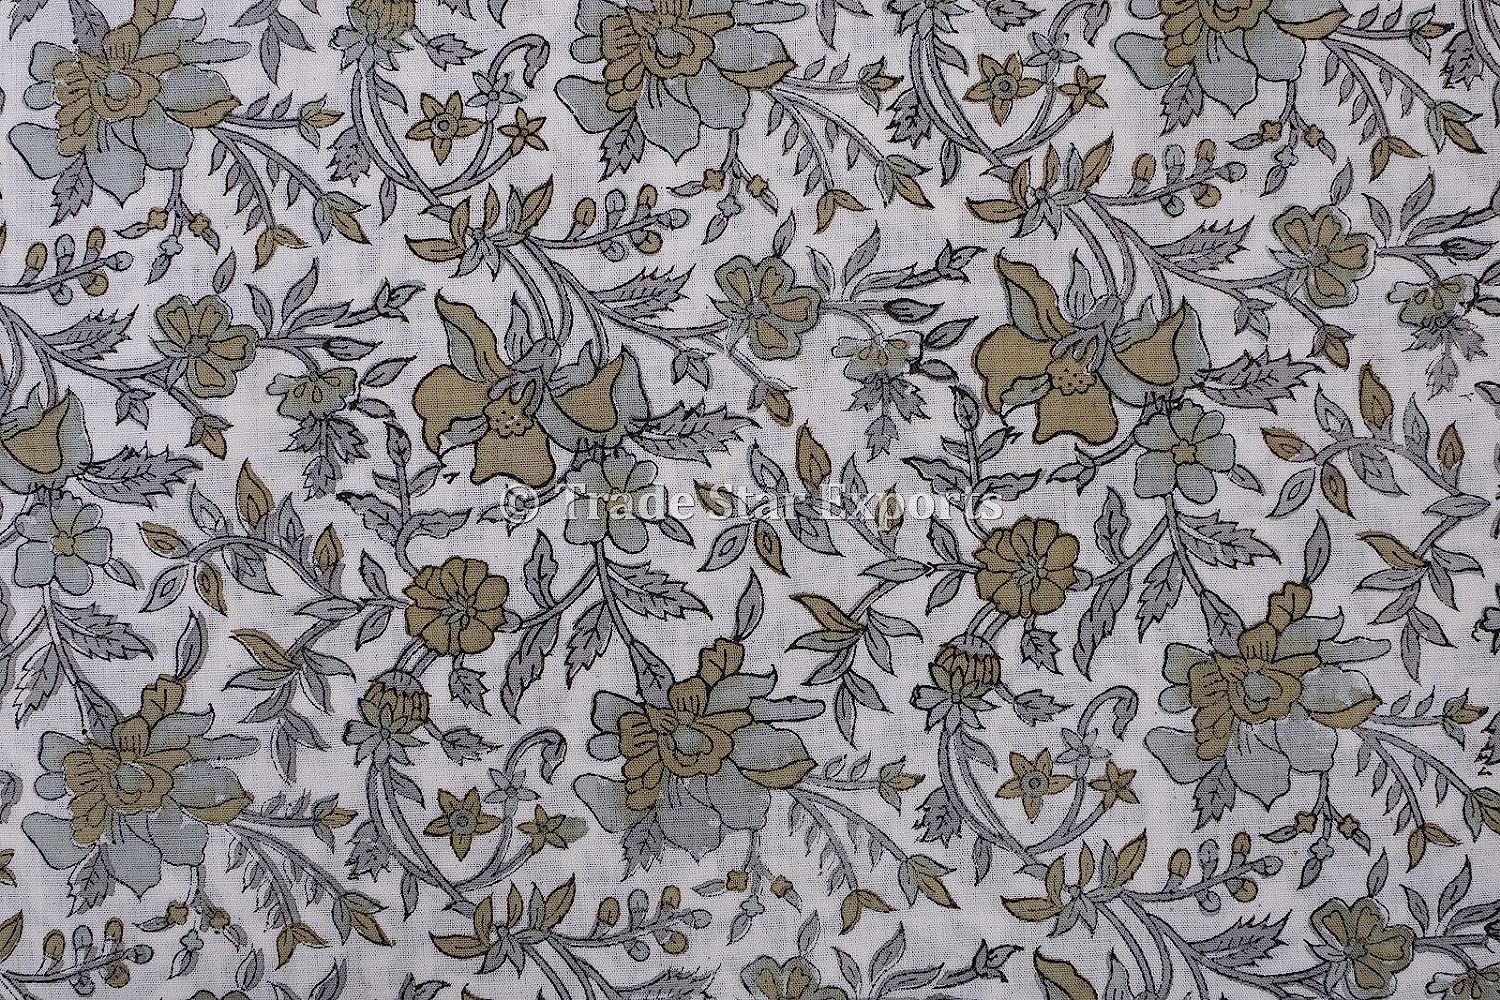 Trade Star Exports Indian Ethnic 100% Cotton Voile Running 3 Yard Hand Block Print Natural Fabric... | Amazon (US)